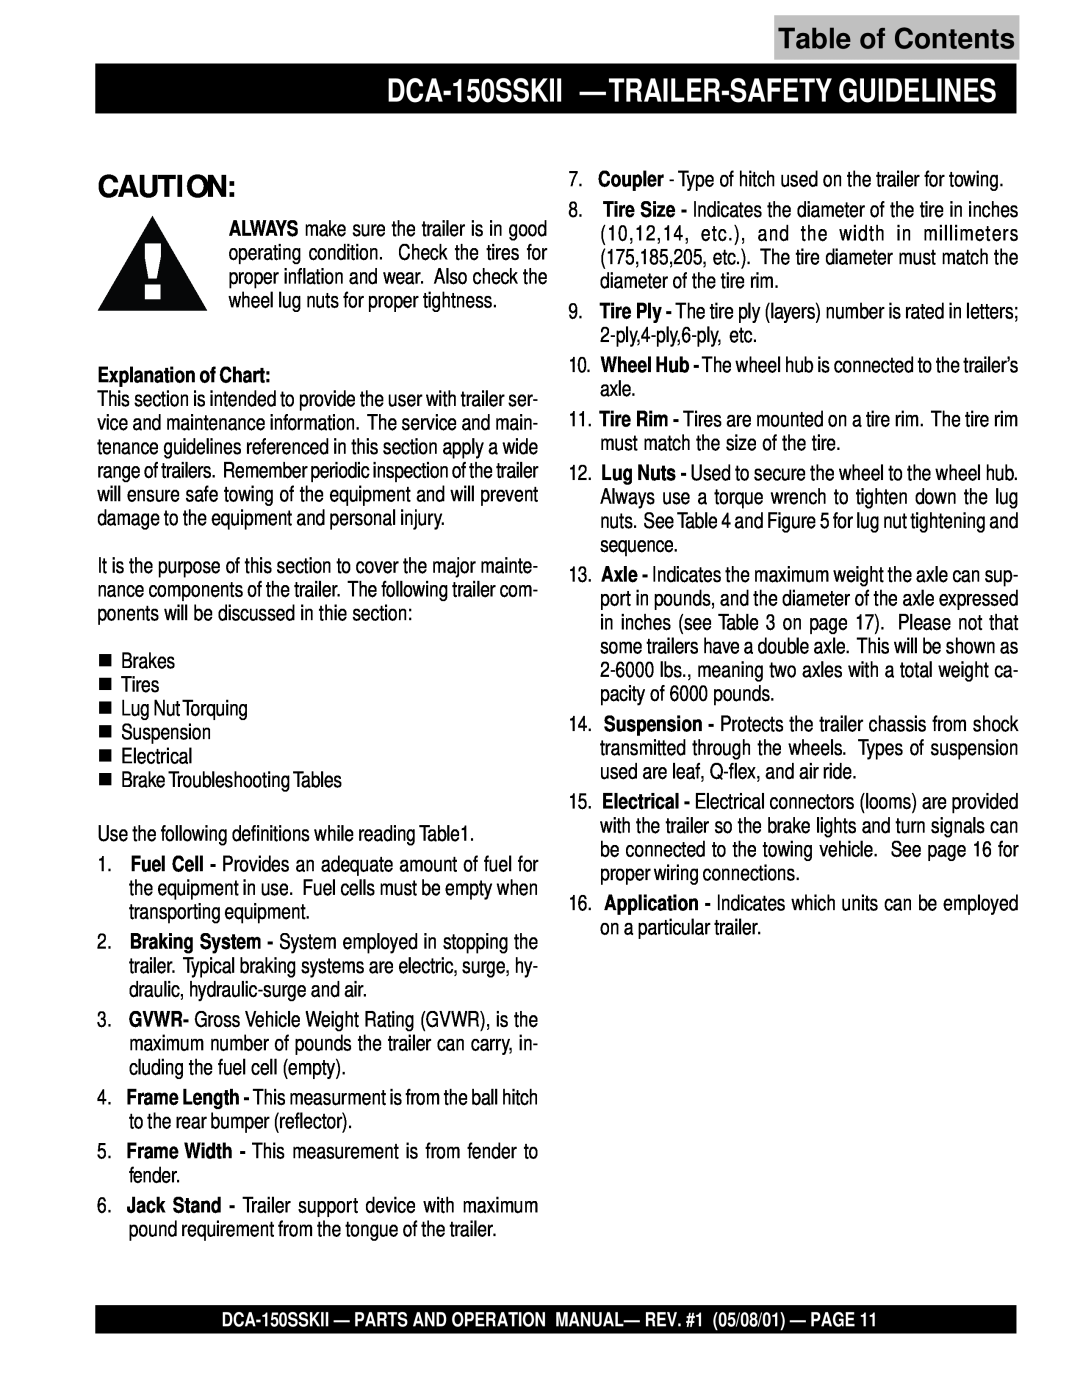 Multiquip operation manual DCA-150SSKII -TRAILER-SAFETY GUIDELINES, Explanation of Chart, Table of Contents 